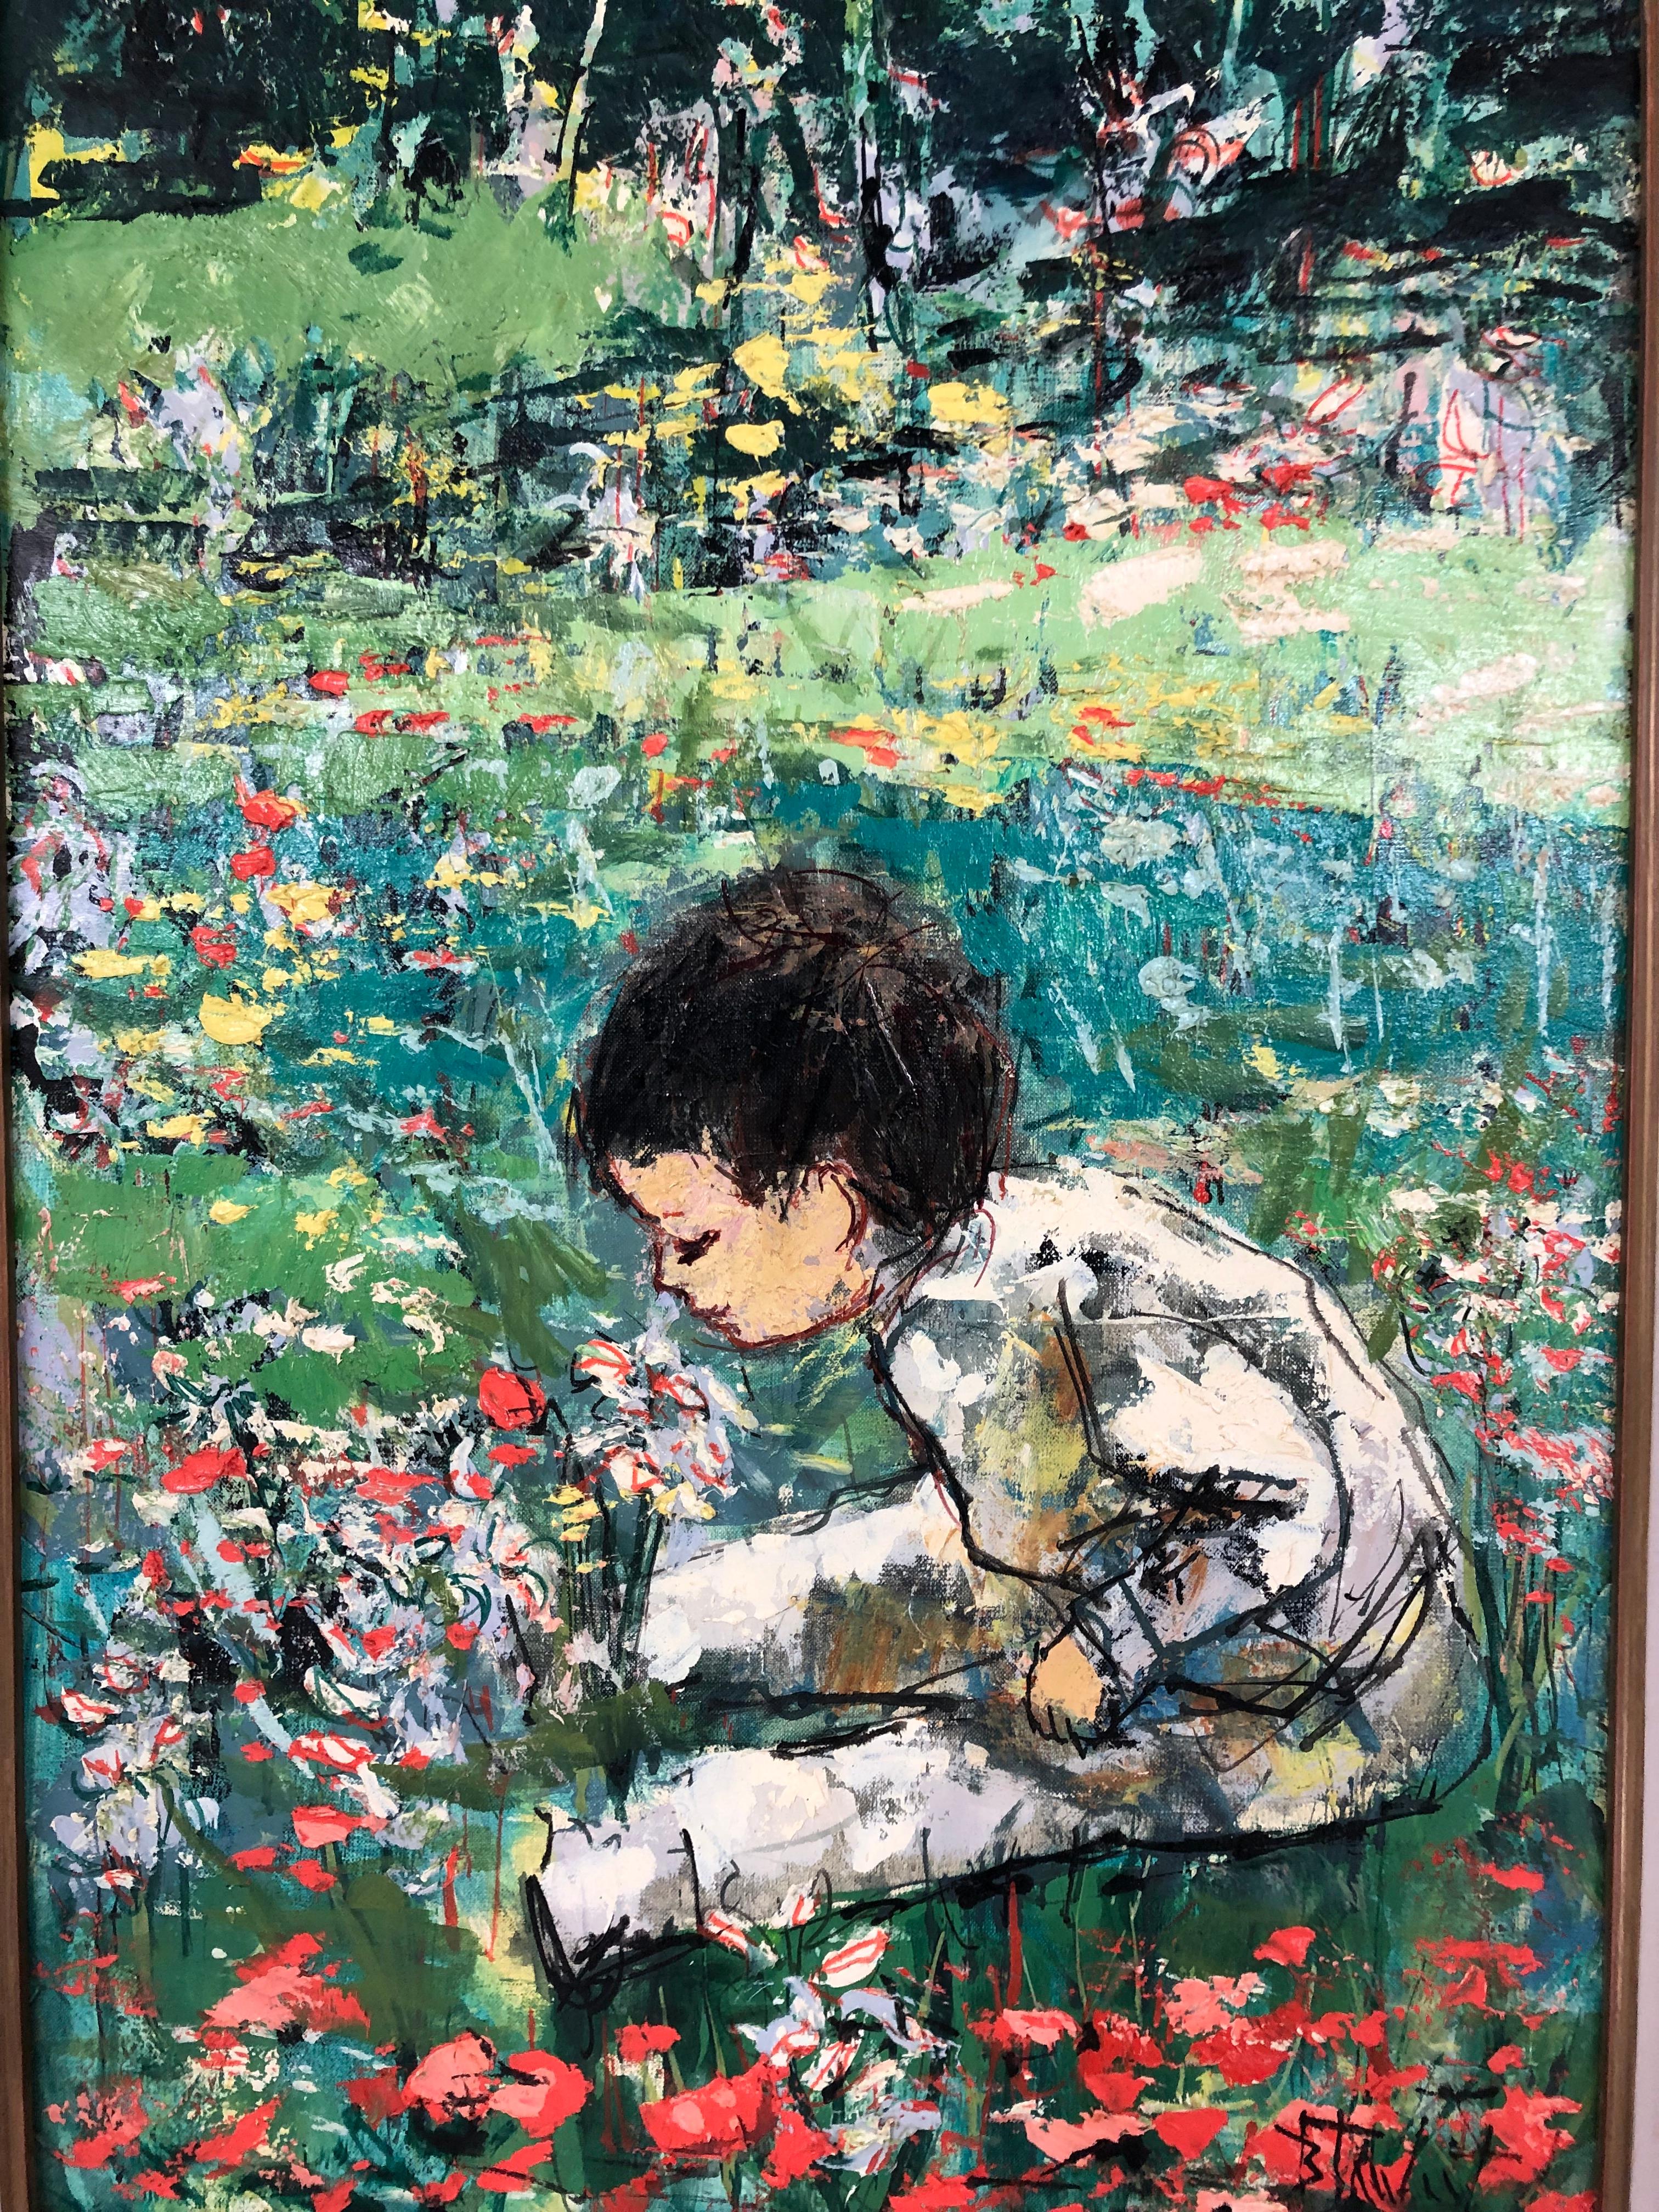 Boy In The Landscape Smelling Flowers - Painting by Bertoldo Taubert